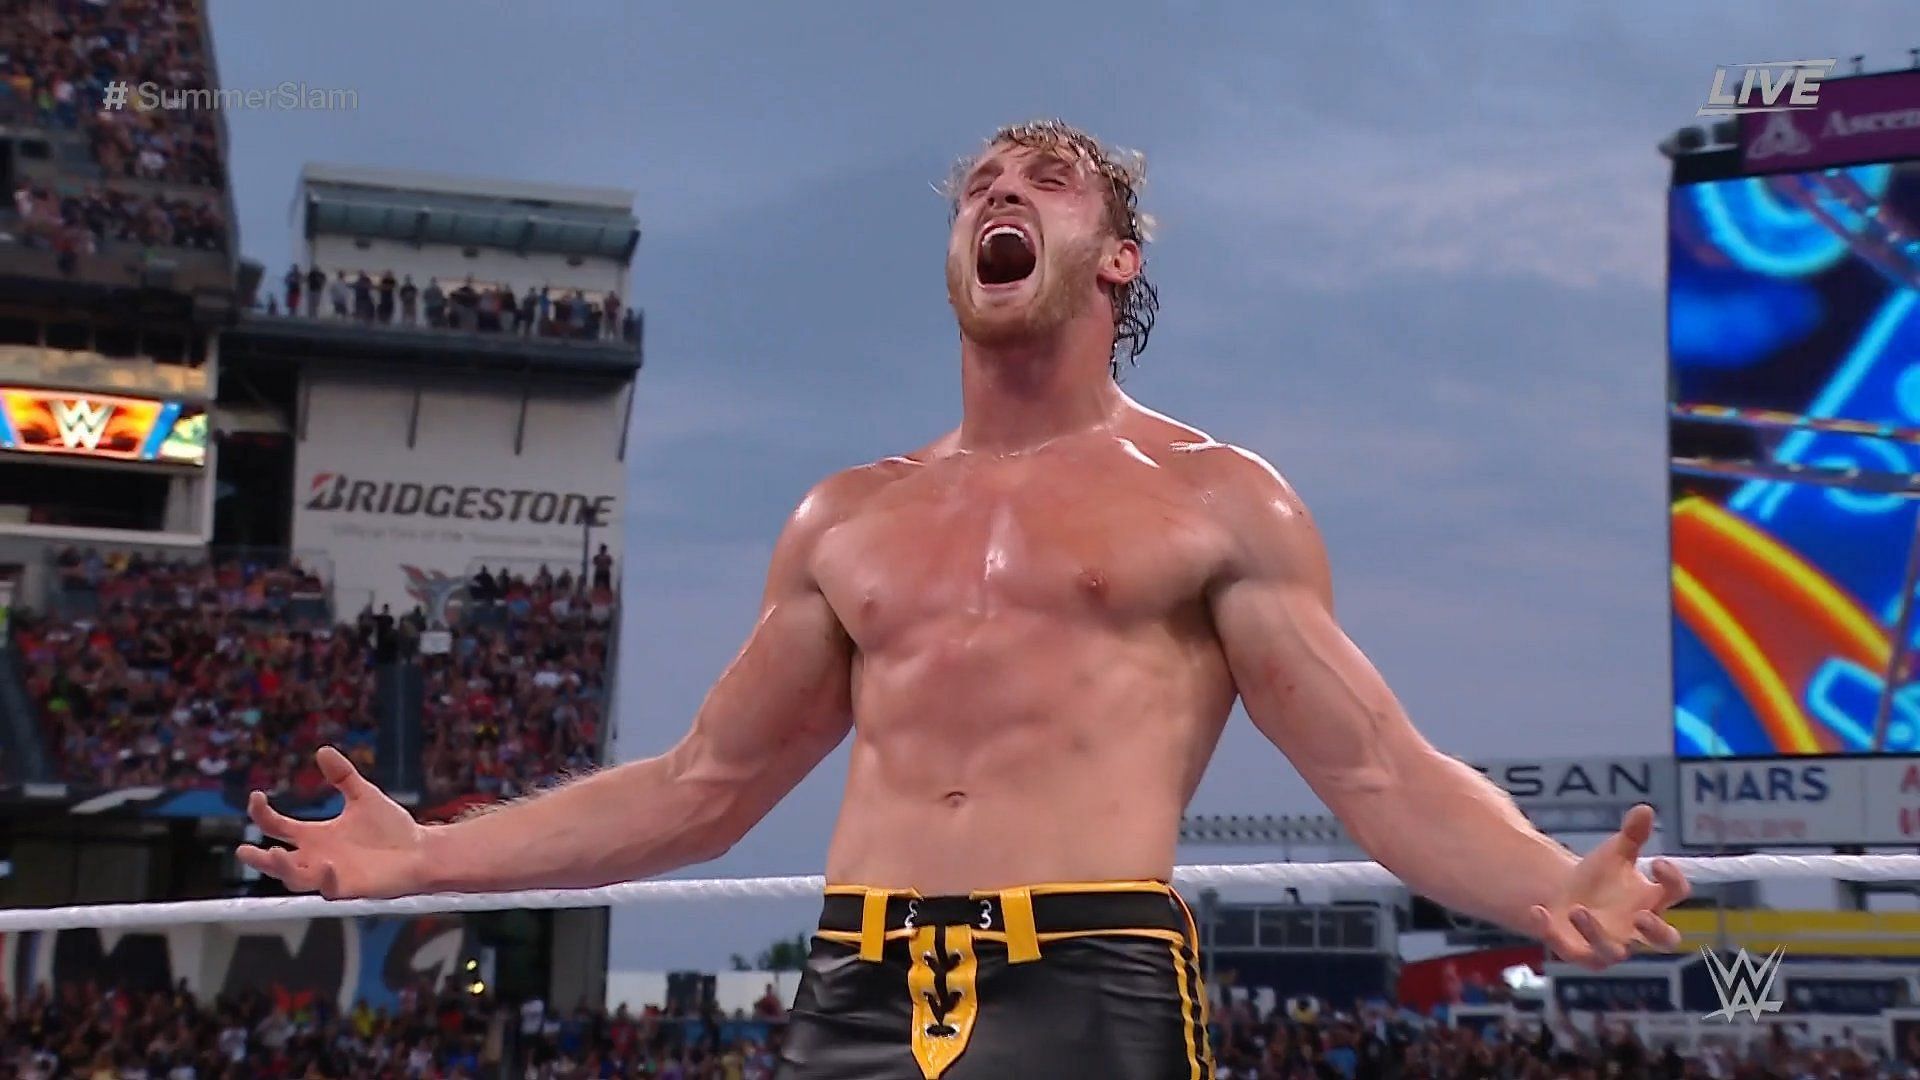 Logan Paul has impressed the WWE Universe with his in0ring performances